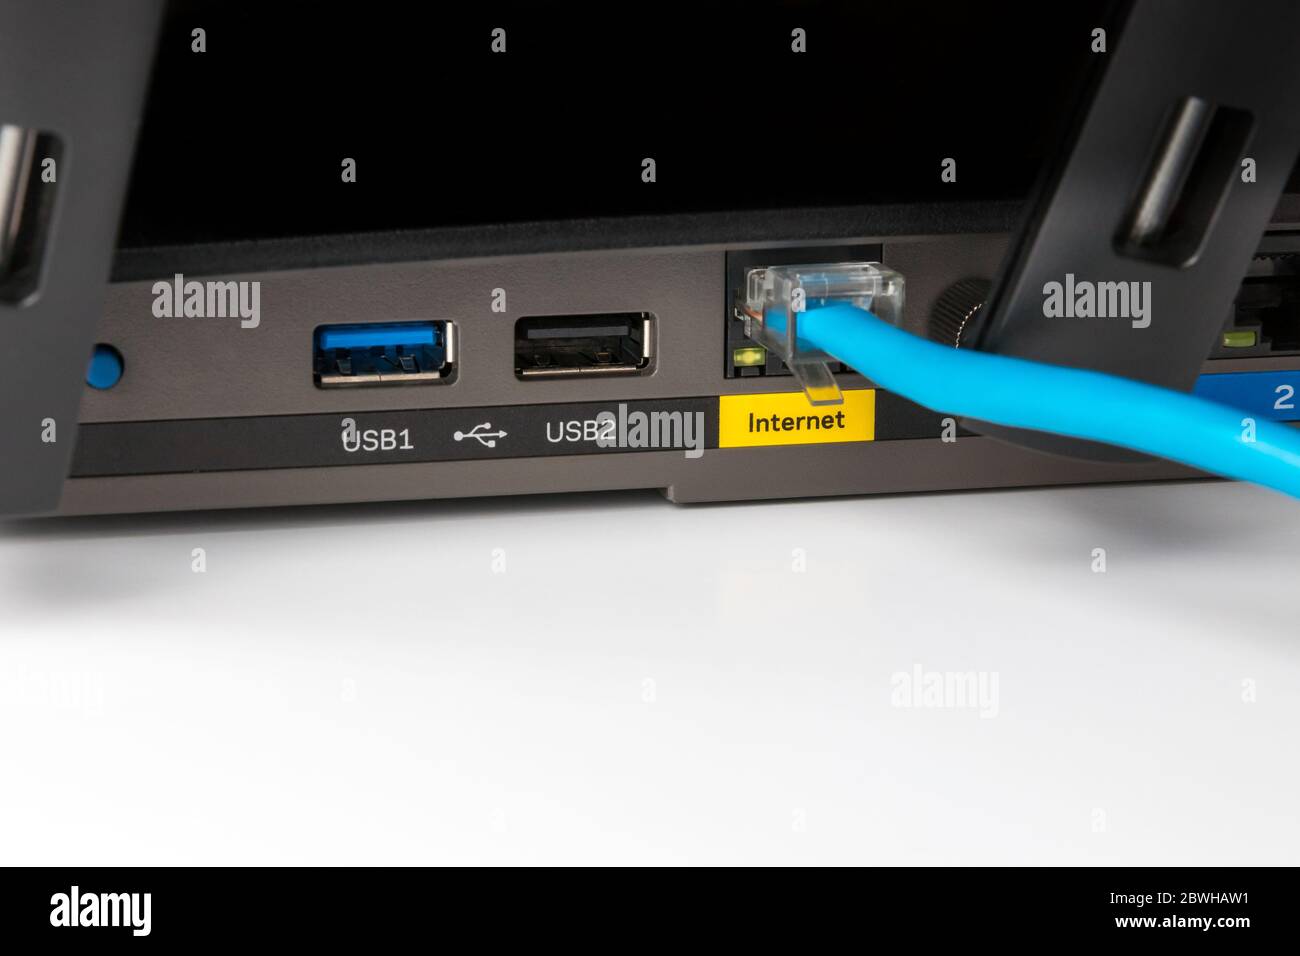 Closeup of wireless router ethernet and internet connection. Concept of internet access, data, e-commerce and e-learning Stock Photo